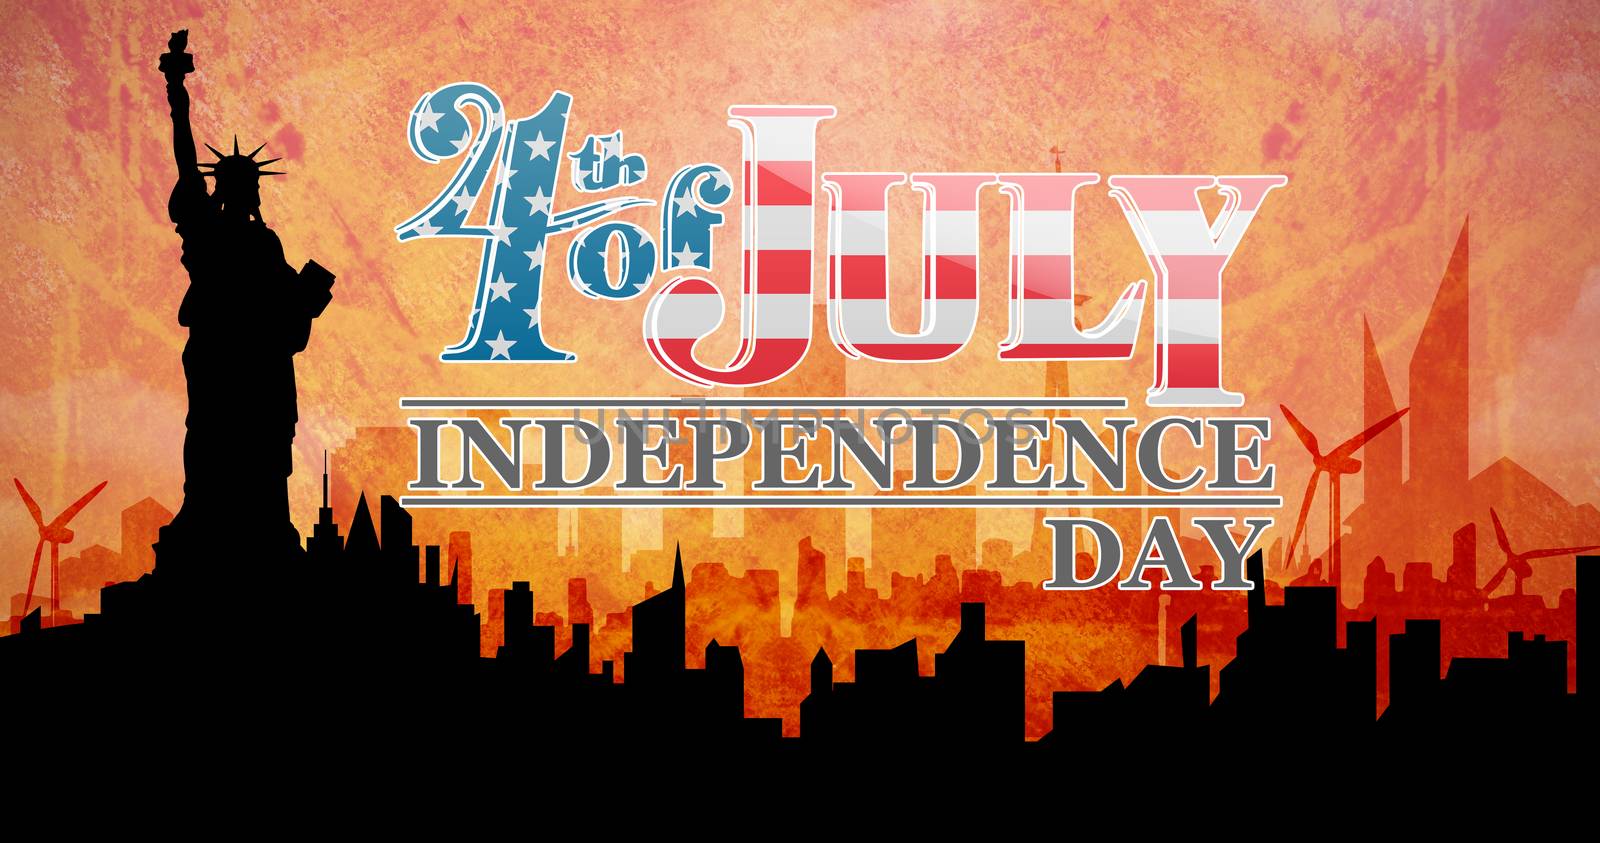 Independence day graphic against artistic cityscape design